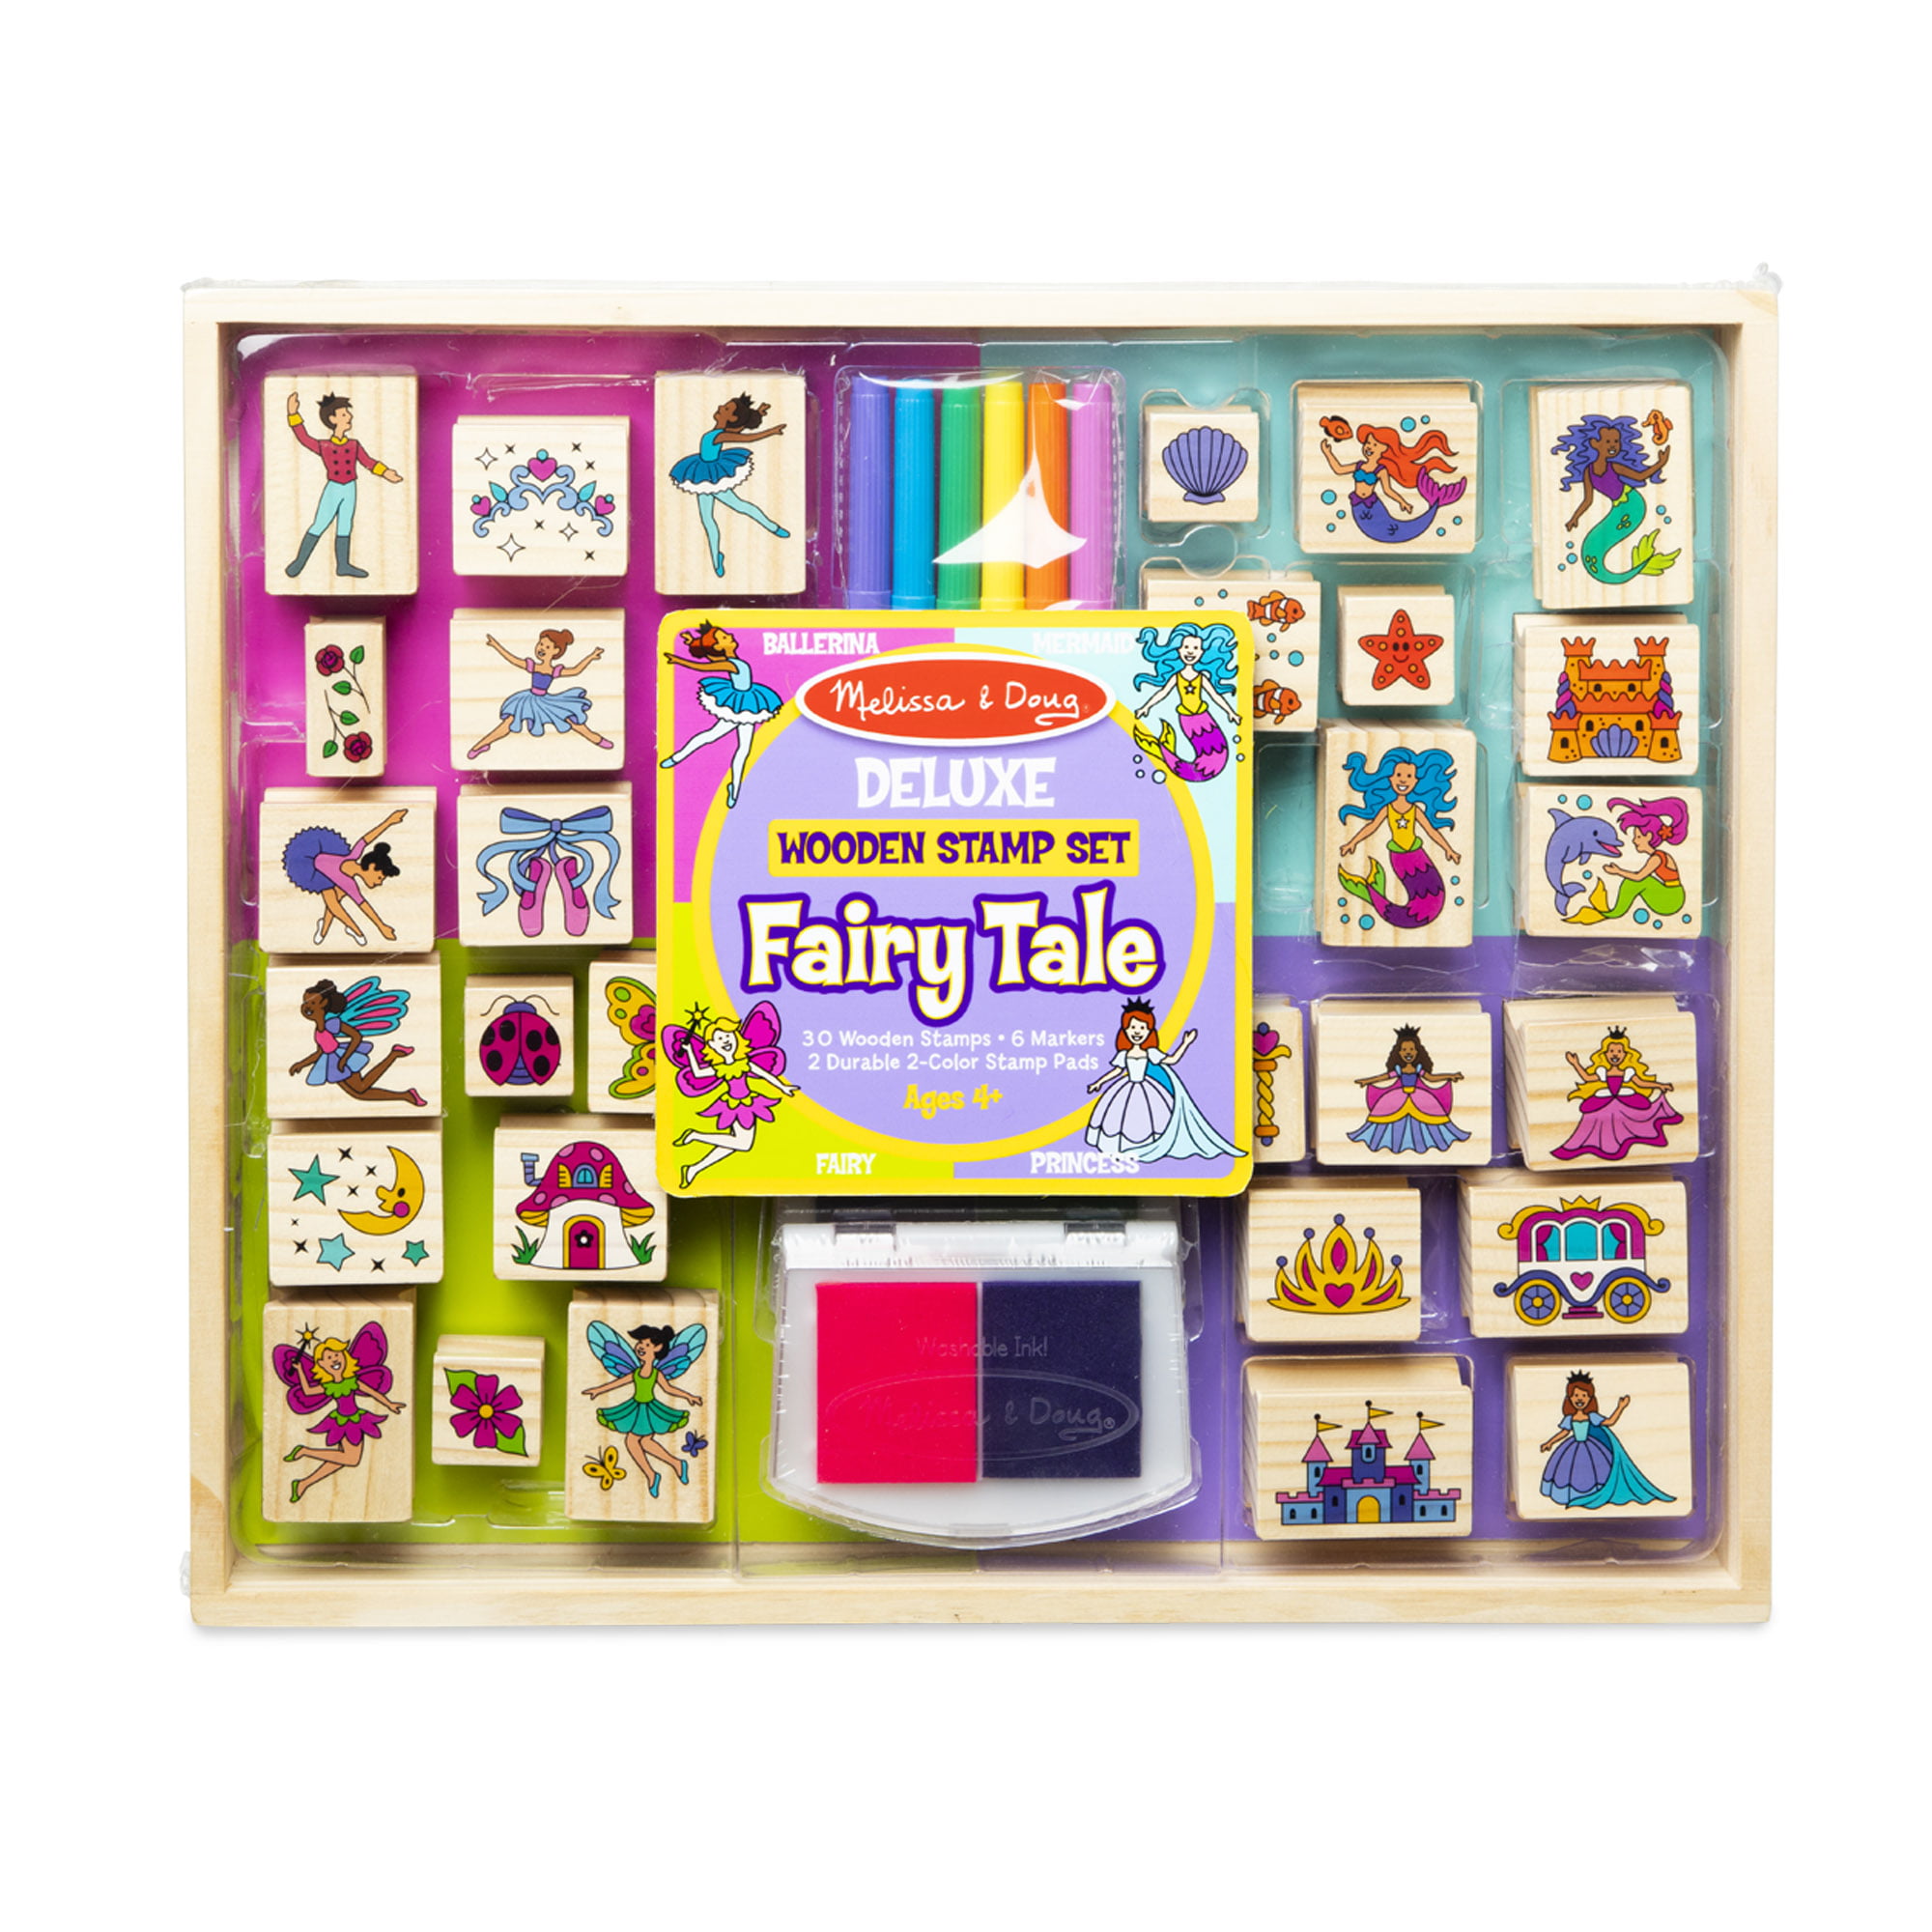 Melissa & Doug Deluxe Wooden Stamp and Coloring Set 30 Stamps, 6 Markers, 2 Durable 2-Color Stamp Pads Fairy Tale